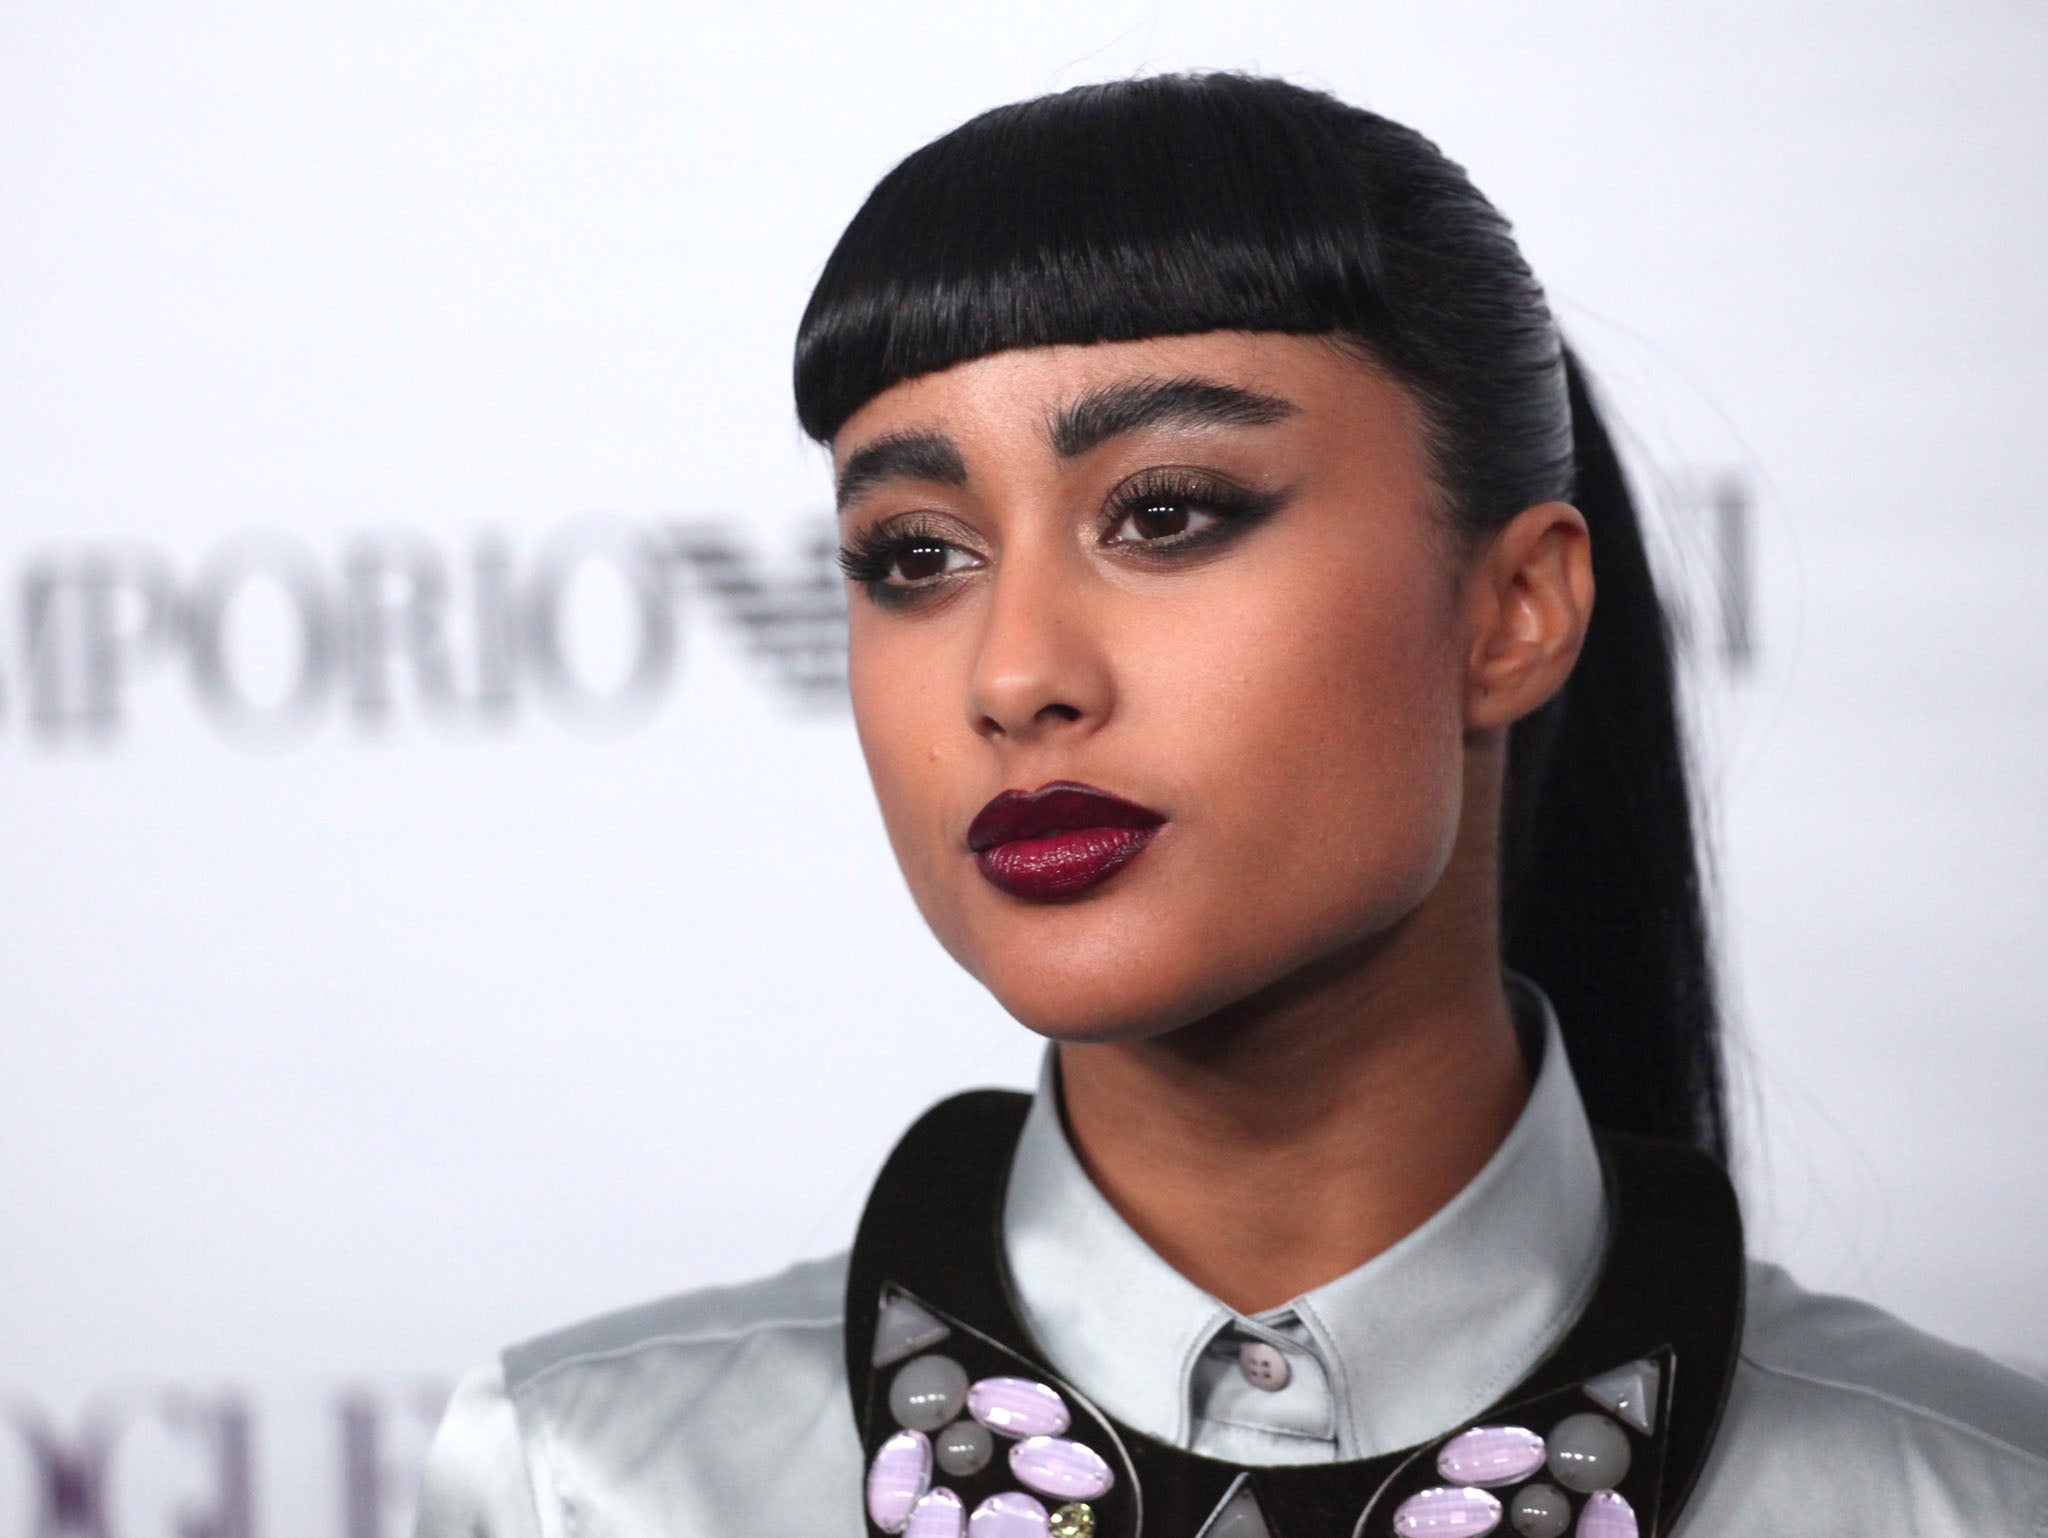 Natalia Kills Begs Forgiveness For X Factor Bullying As Louis Walsh Delivers Damning Verdict